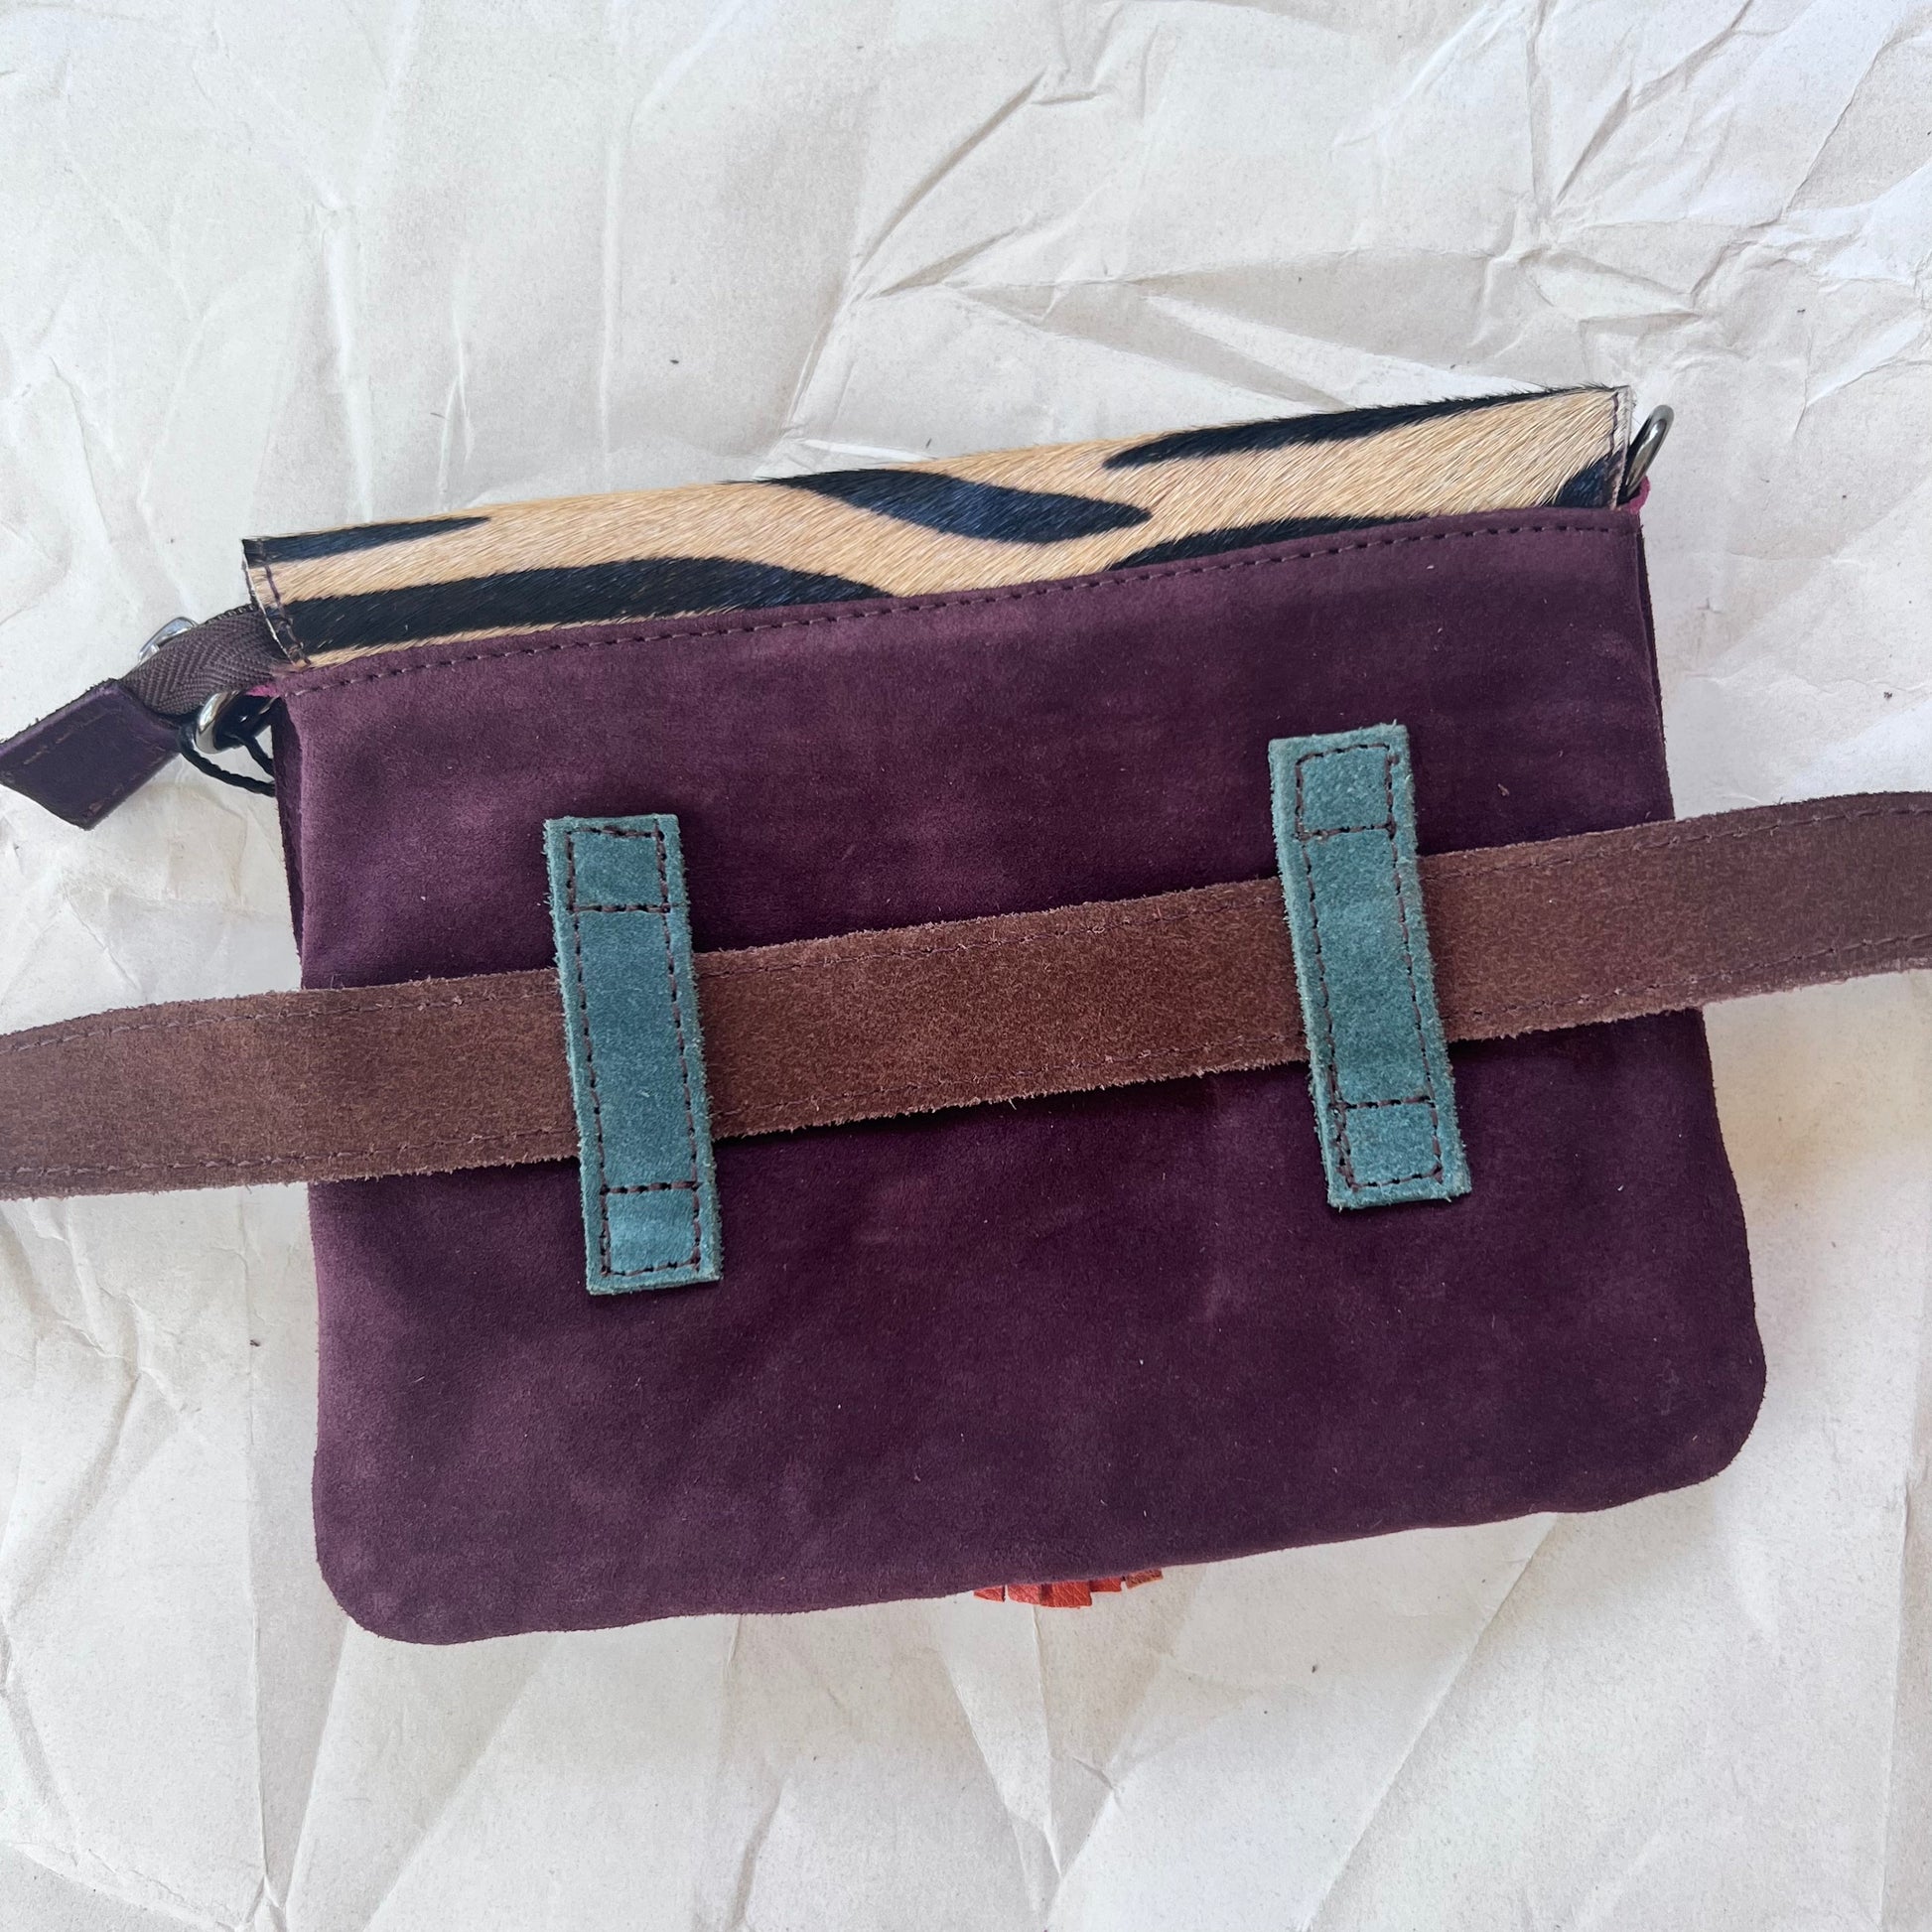 solid purple back of bag with loops holding belt.